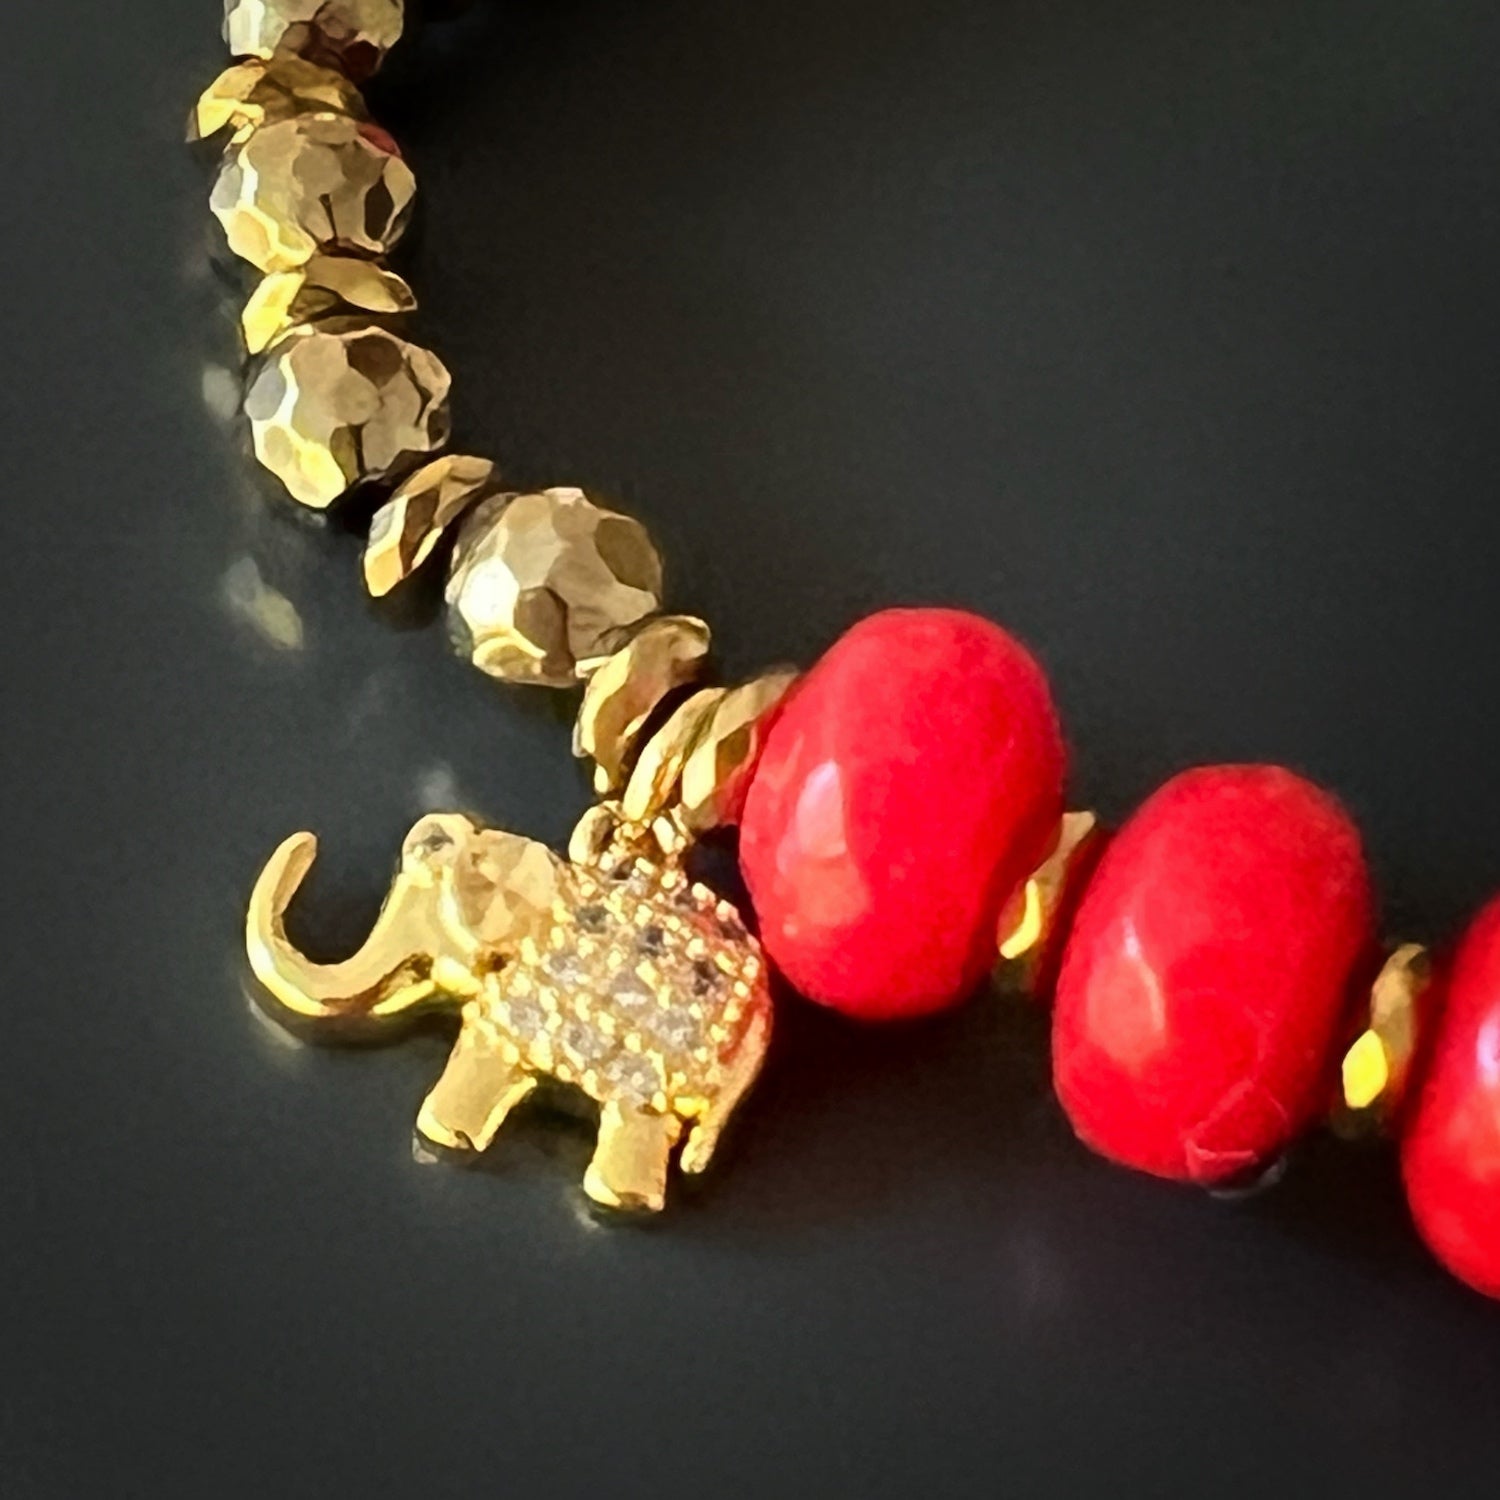 The Red Heart Lucky Elephant Bracelet is a beautiful representation of luck and elegance, with hematite stone beads and a gold-plated Elephant charm.